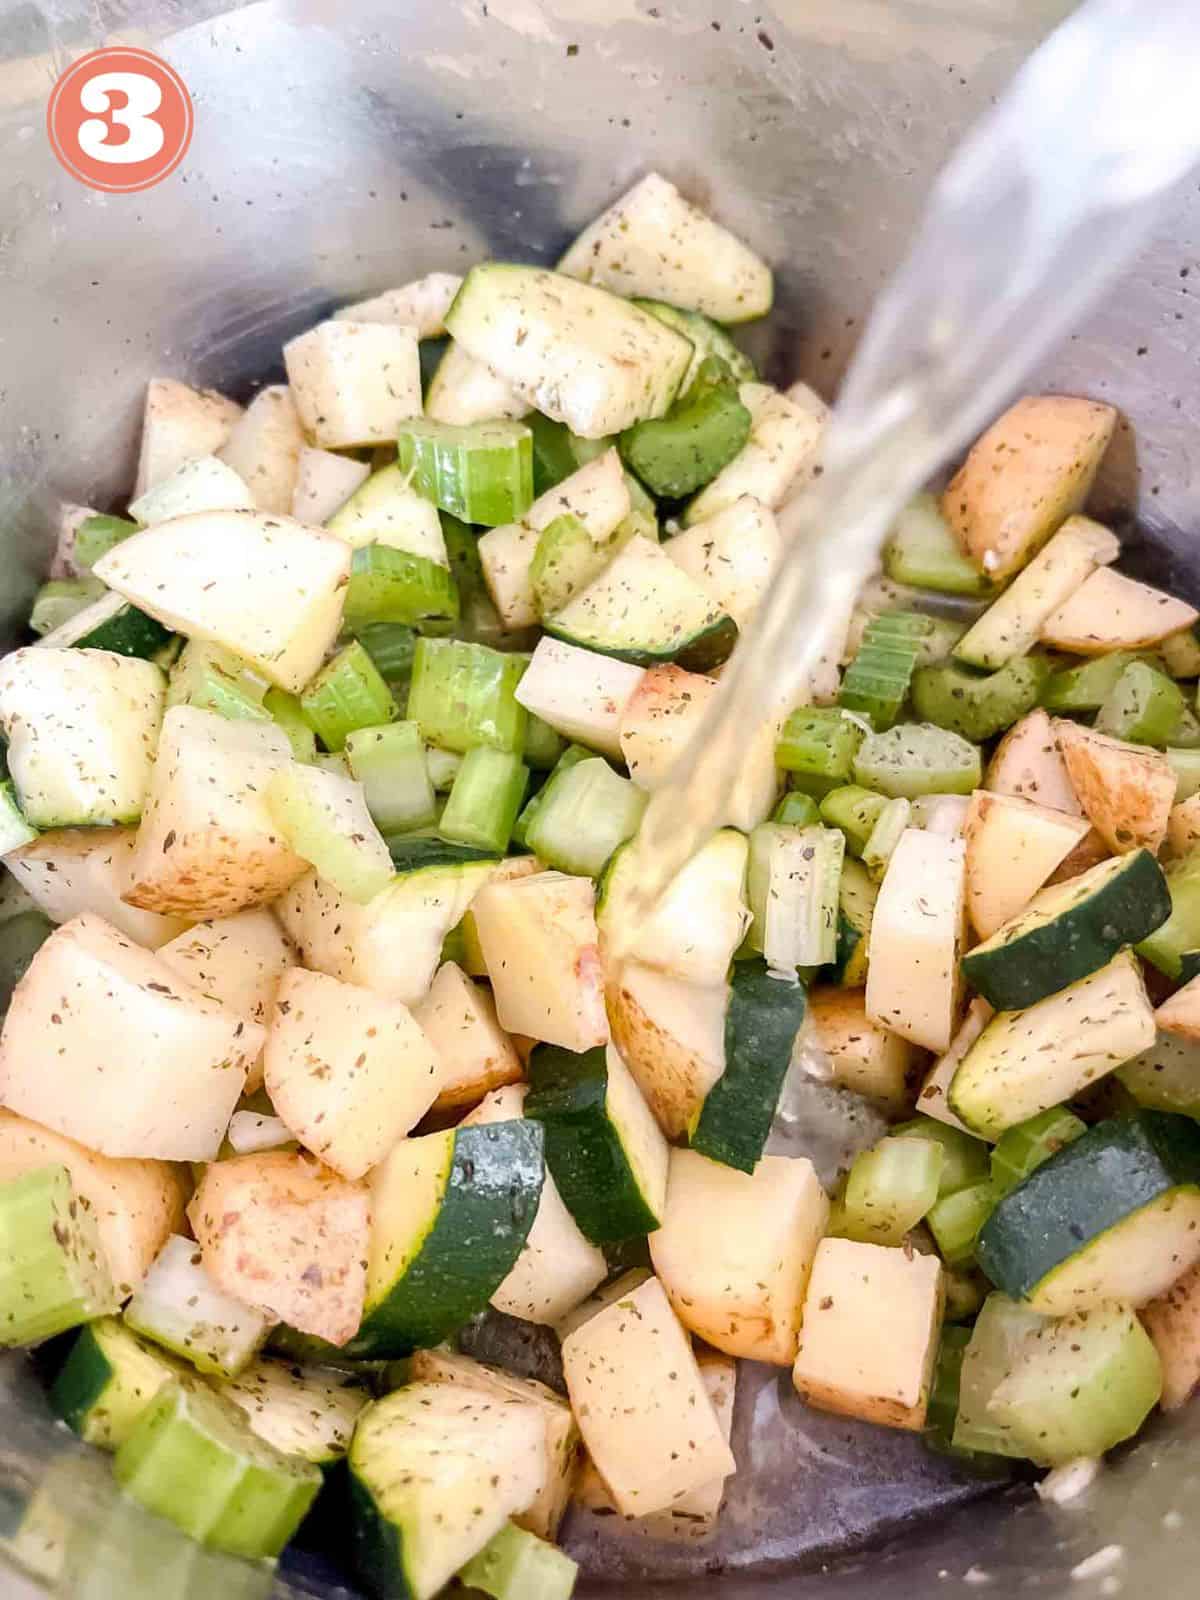 celery, potato and zucchini in a metal pot with vegetable stock being poured in labelled number three.